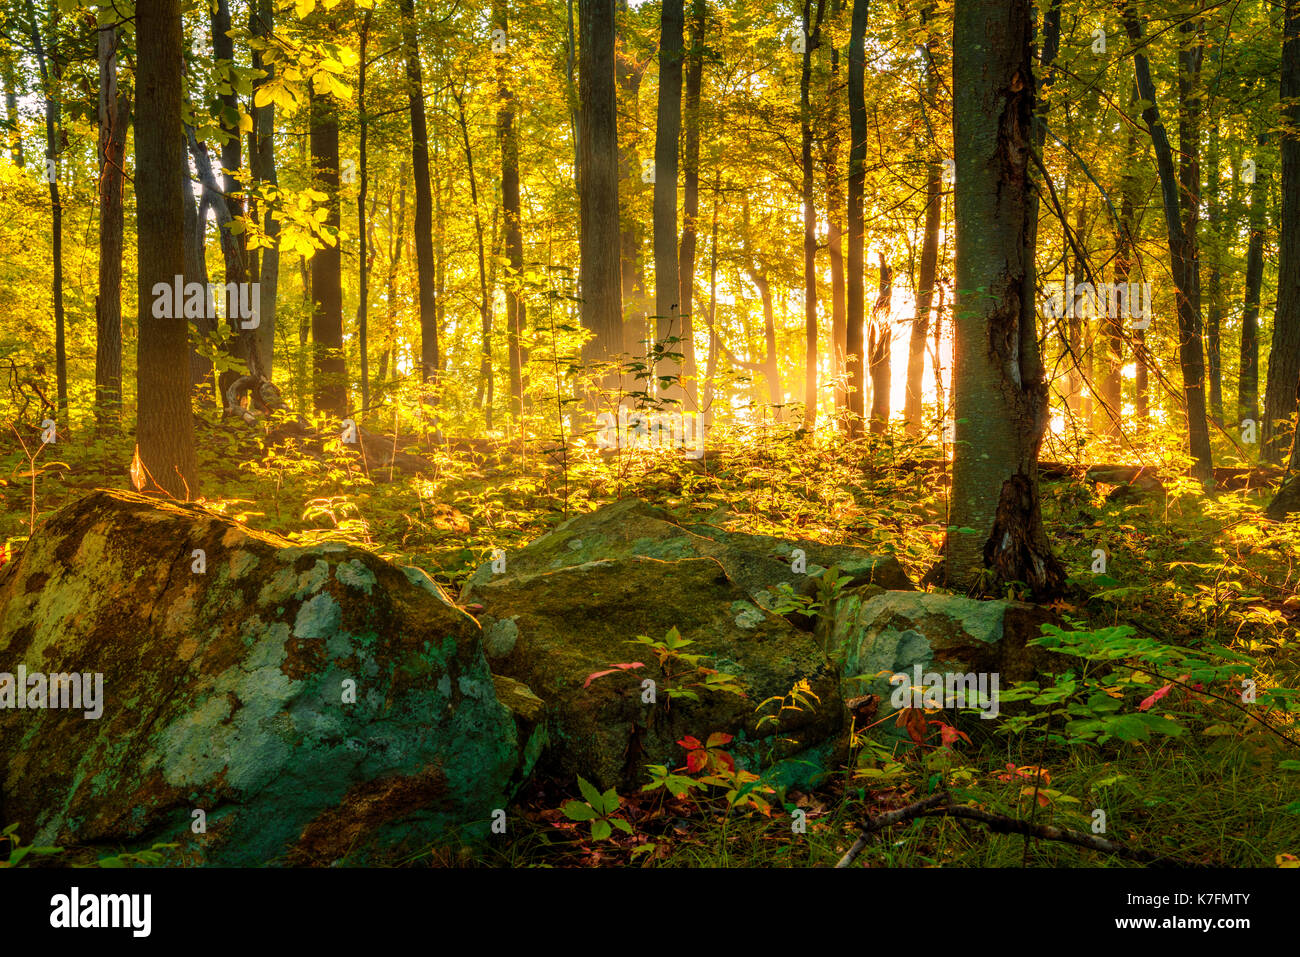 Peaceful Morning Scene In The Forest With Sun Rays Through The Trees Stock Photo Alamy